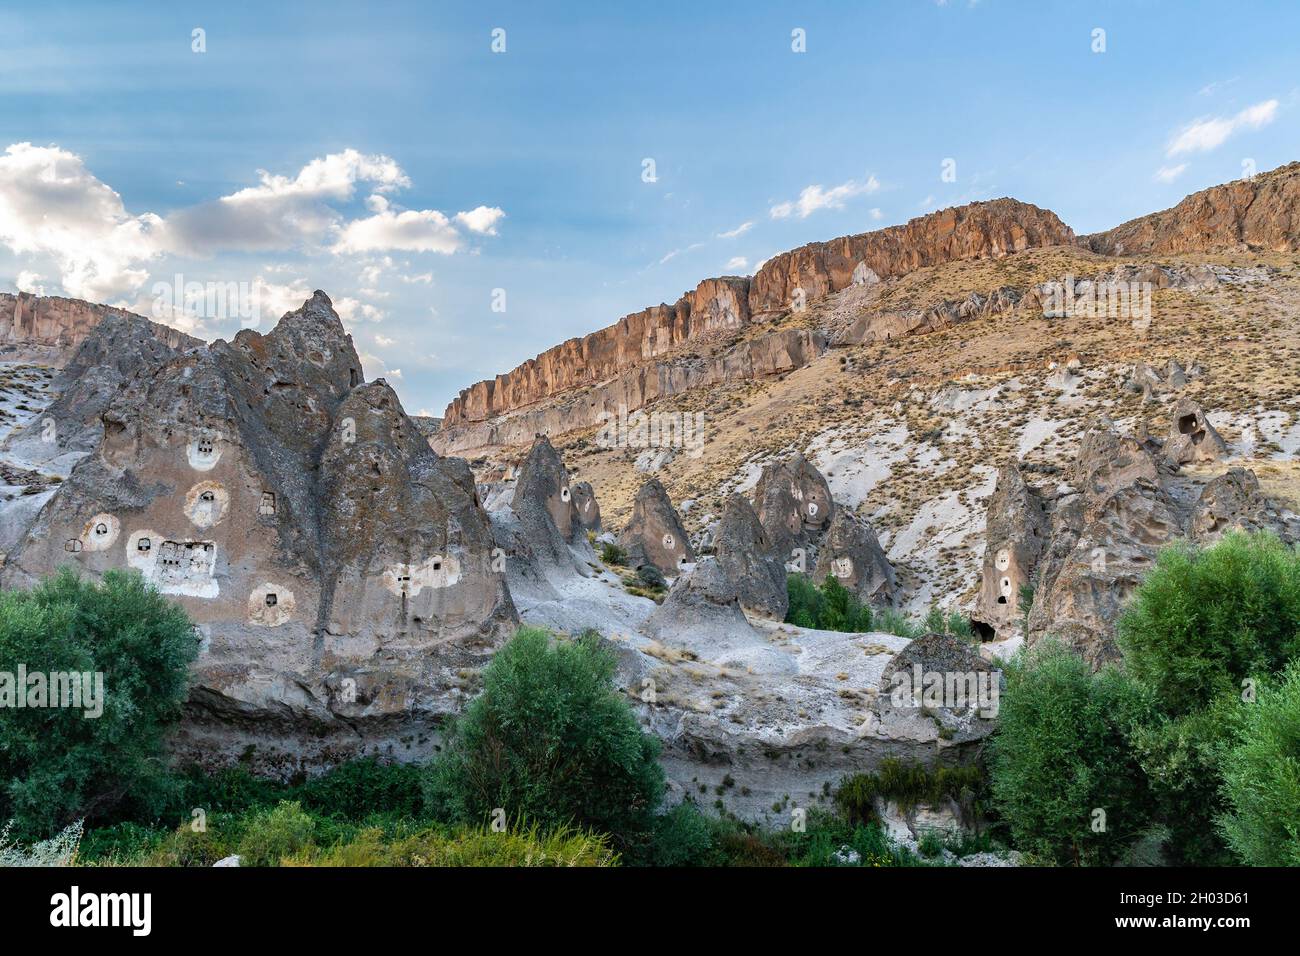 Soganli Valley Breathtaking Picturesque View of Rock-Cut Houses and Cloisters on a Blue Sky Day in Summer Stock Photo